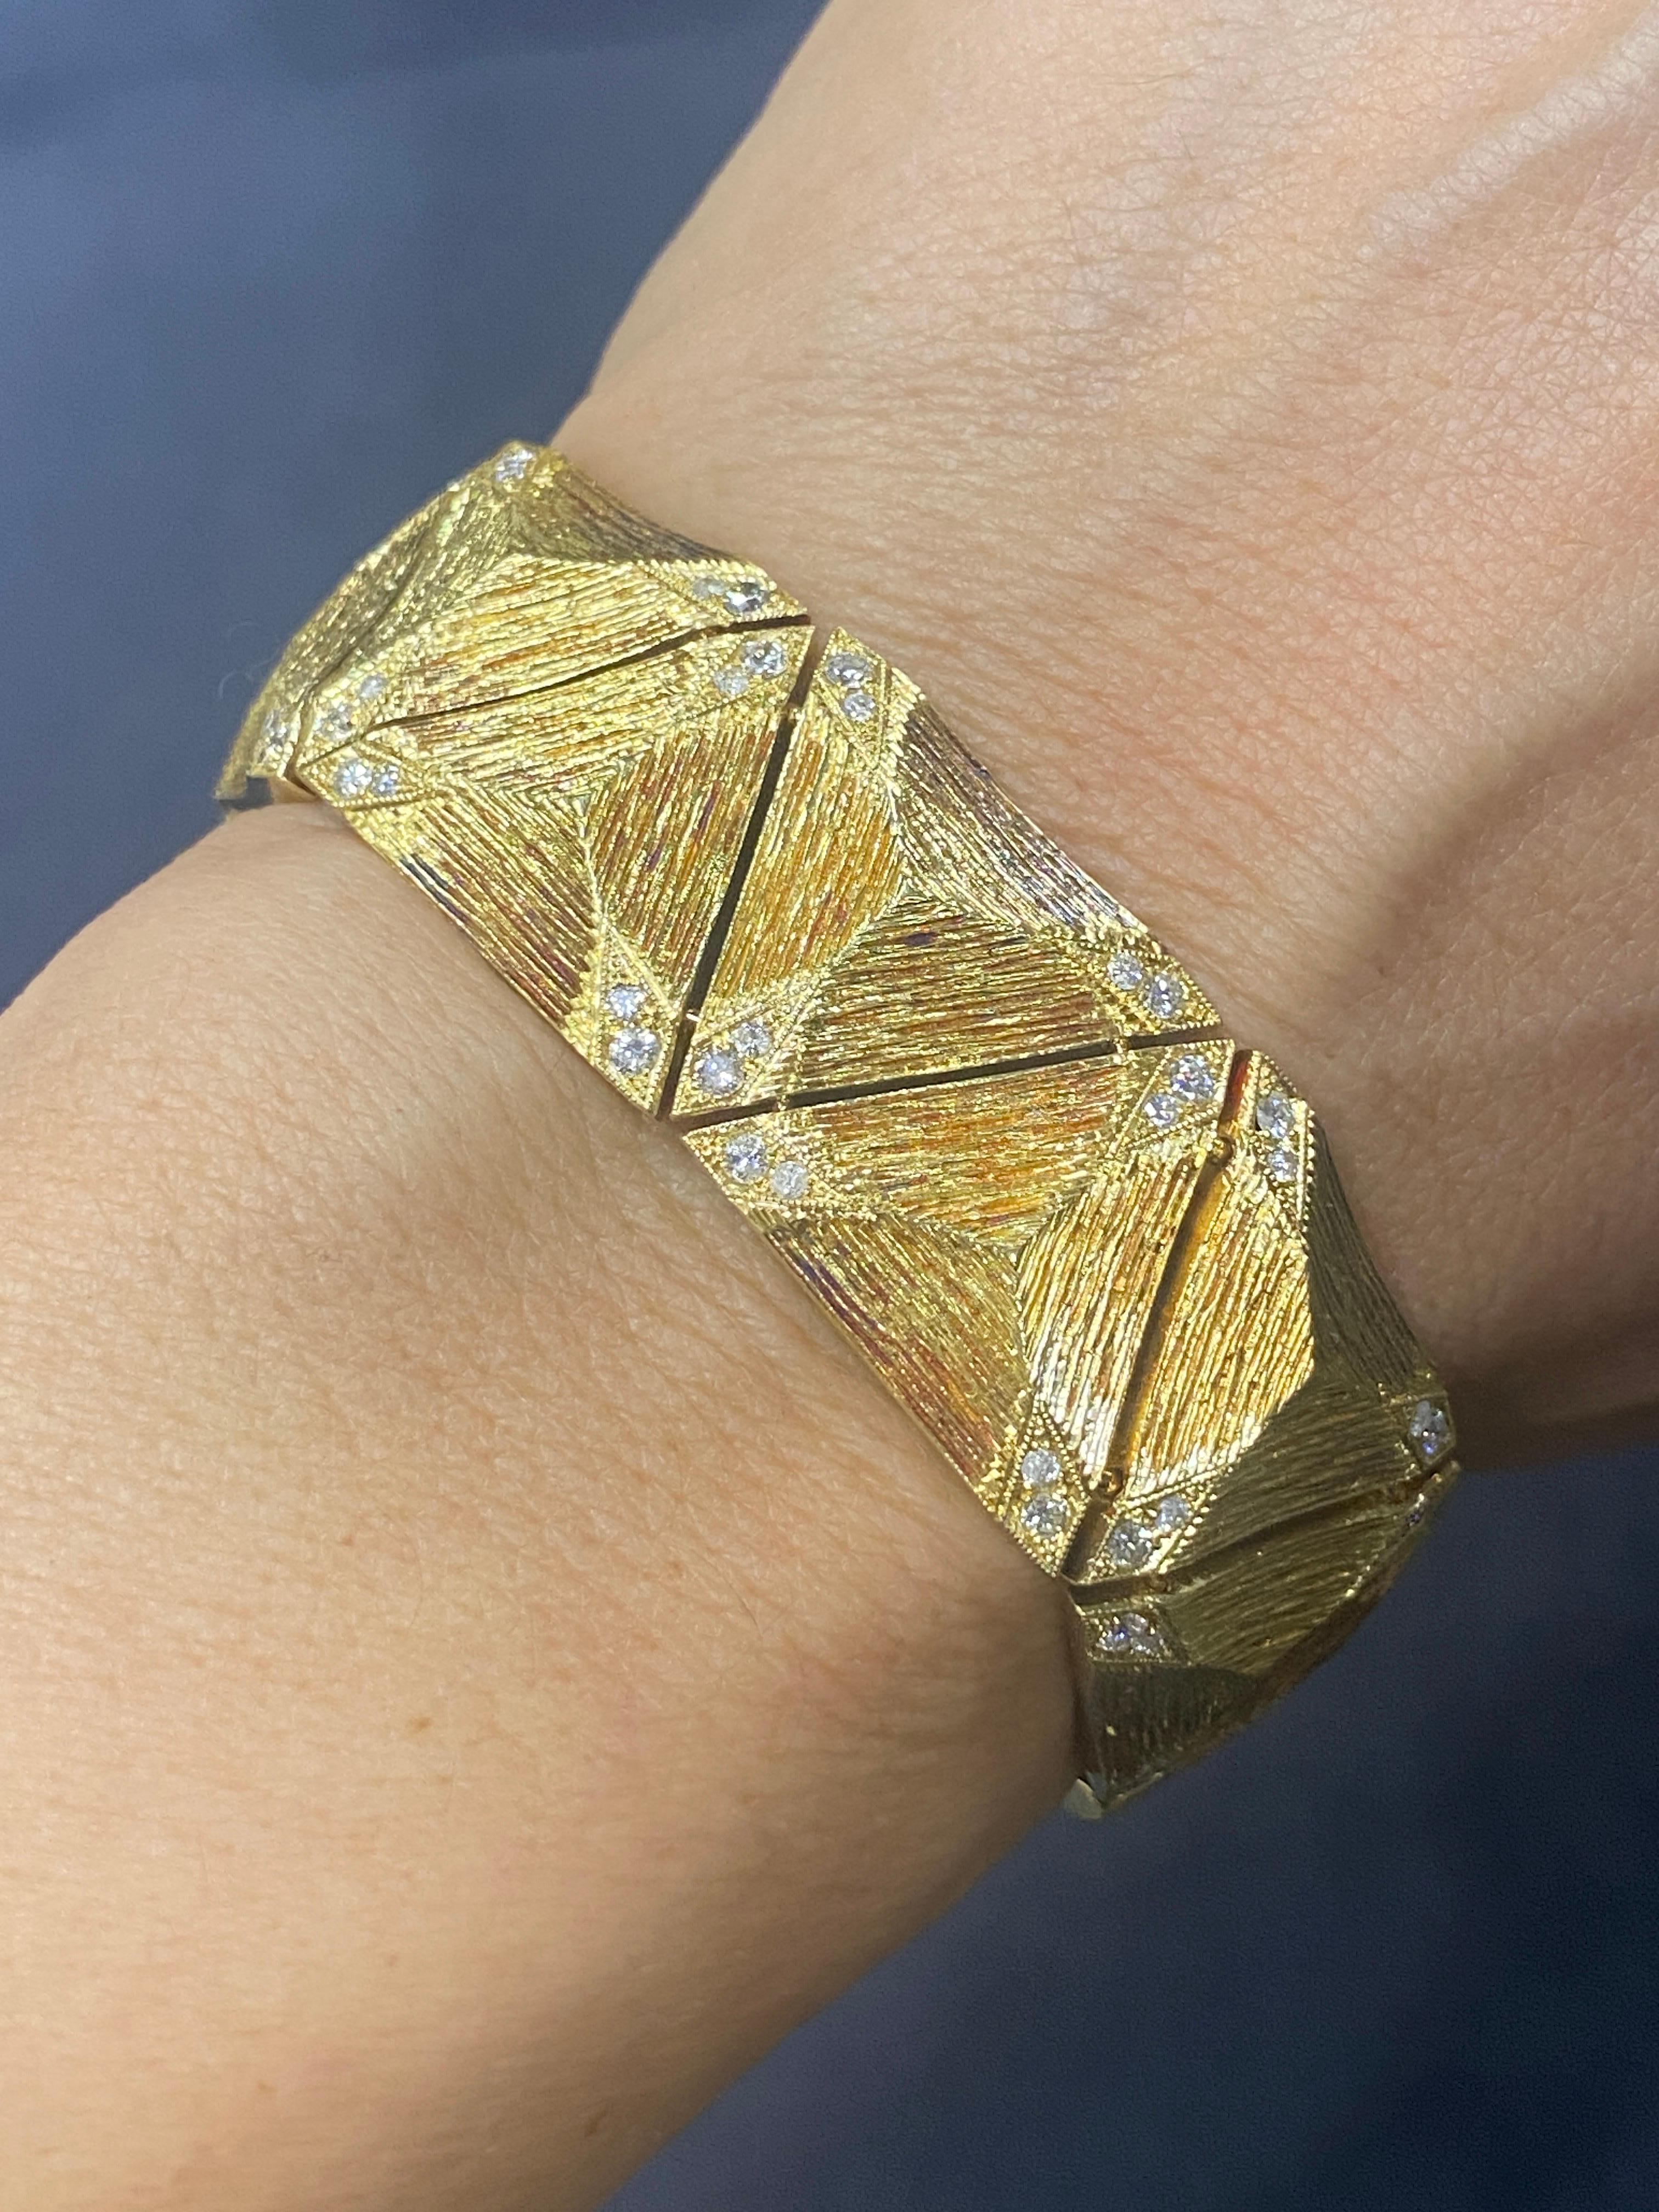 This remarkable 1970s 18k gold bracelet is completely hand made and hand engraved. The corners of each triangular piece is adorned with small diamonds which accentuate the overall sparkle of the bracelet. Although a hefty piece, it lays comfortably